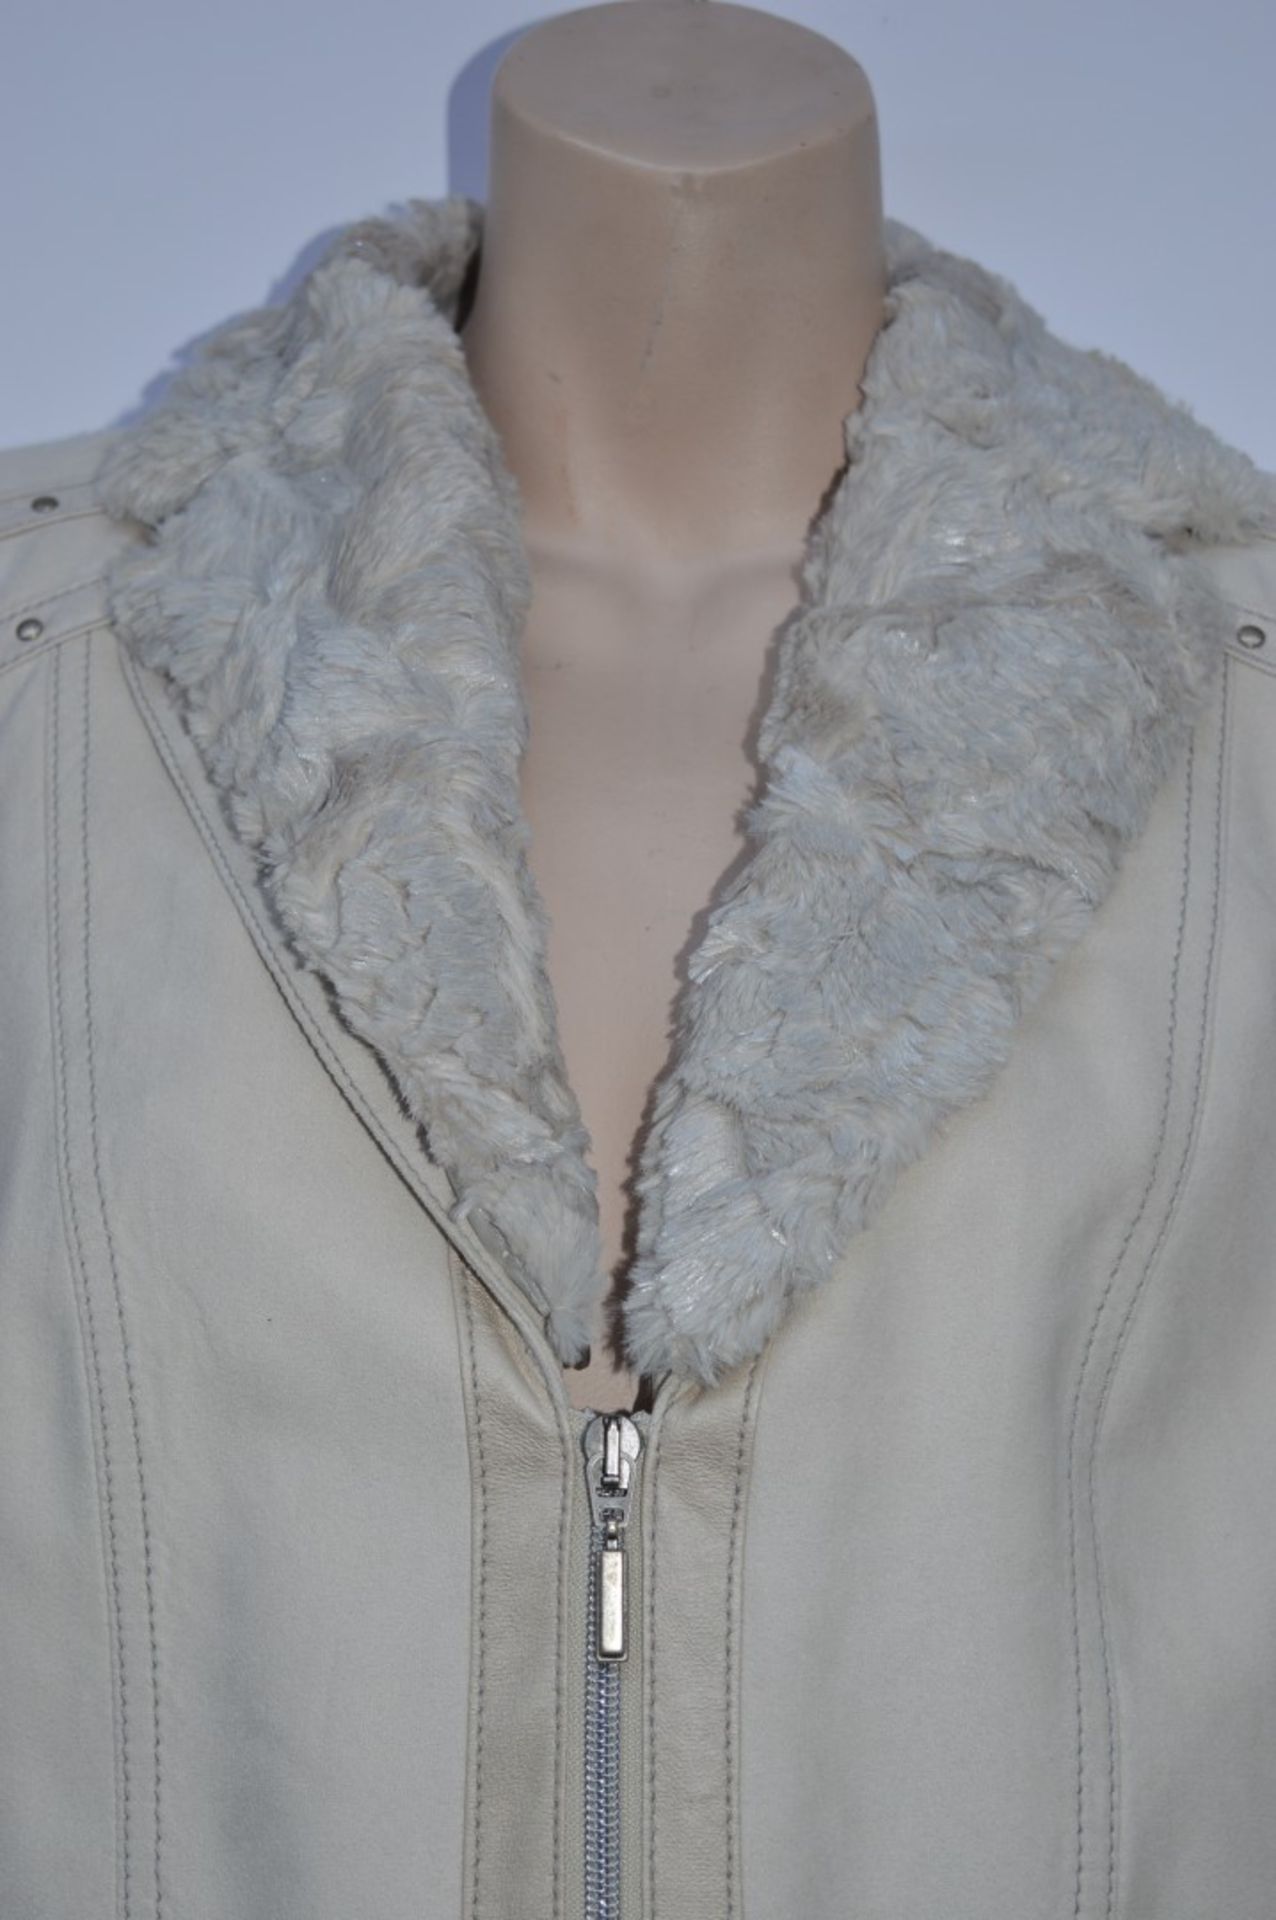 1 x Steilmann KSTN By Kirsten Womens Jacket - With Functional Pockets, Inner Pocket, Faux Fur Collar - Image 3 of 10